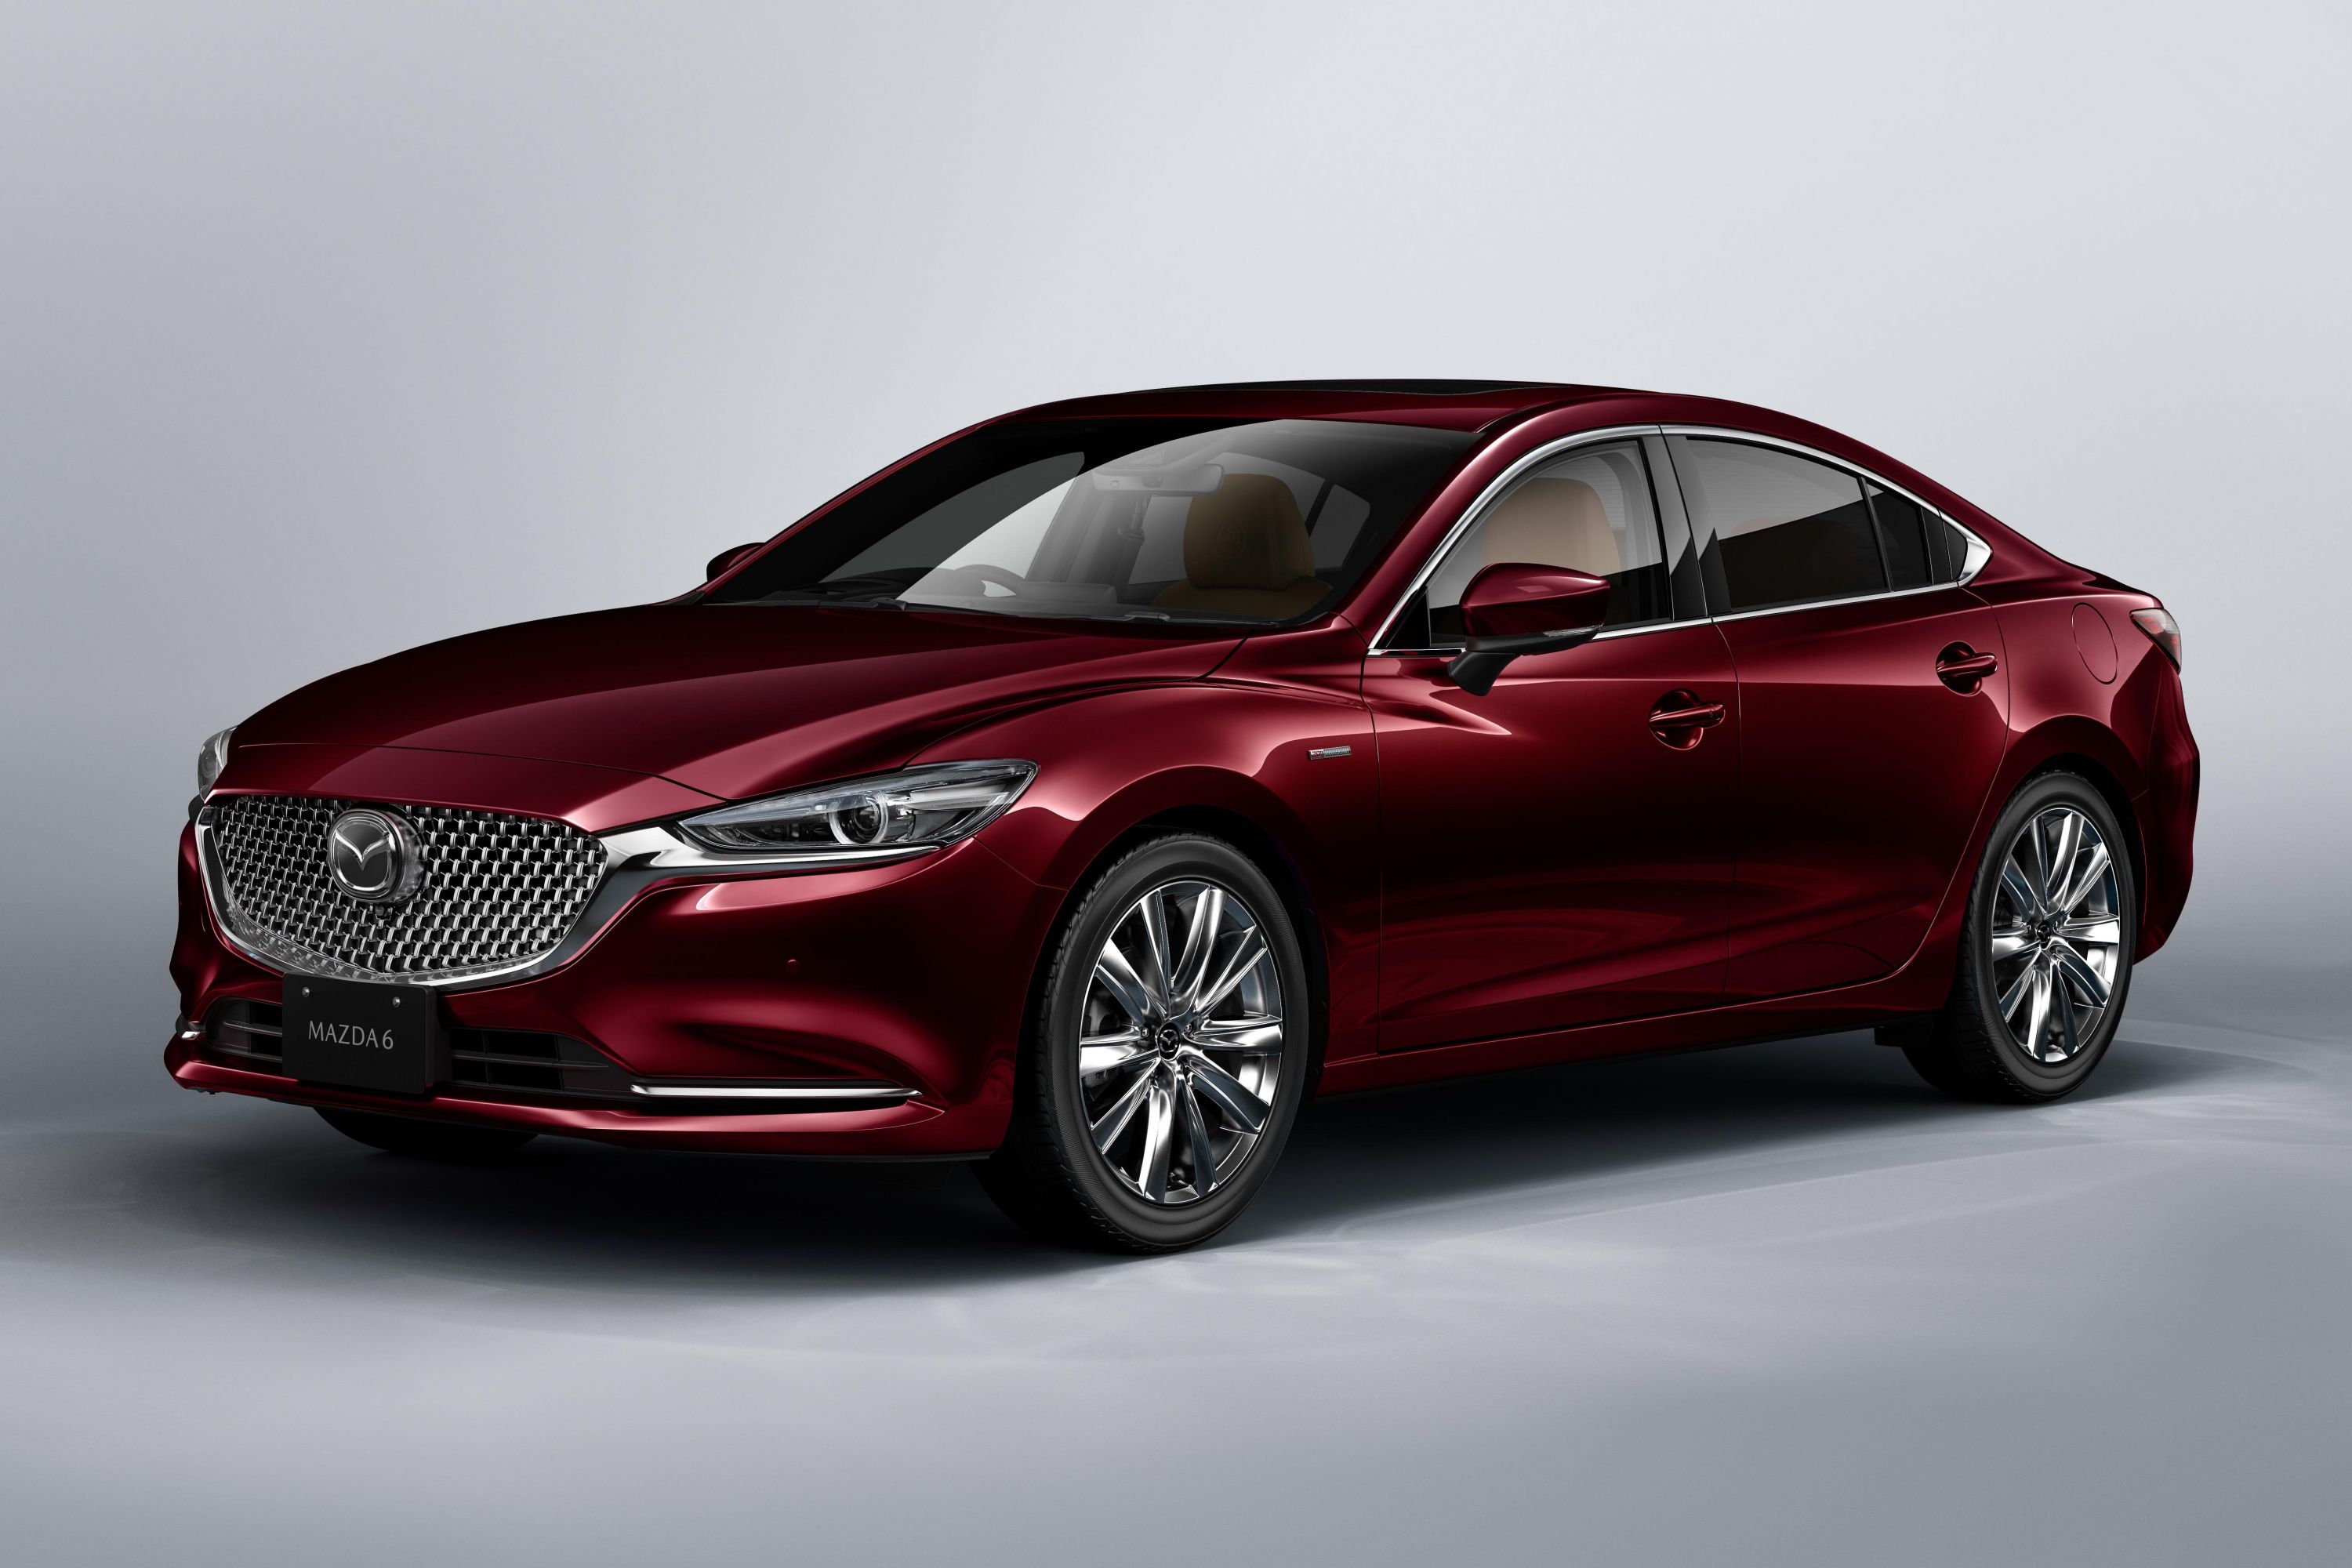 Could the Mazda 6 be replaced by a Chinese electric car? CarExpert